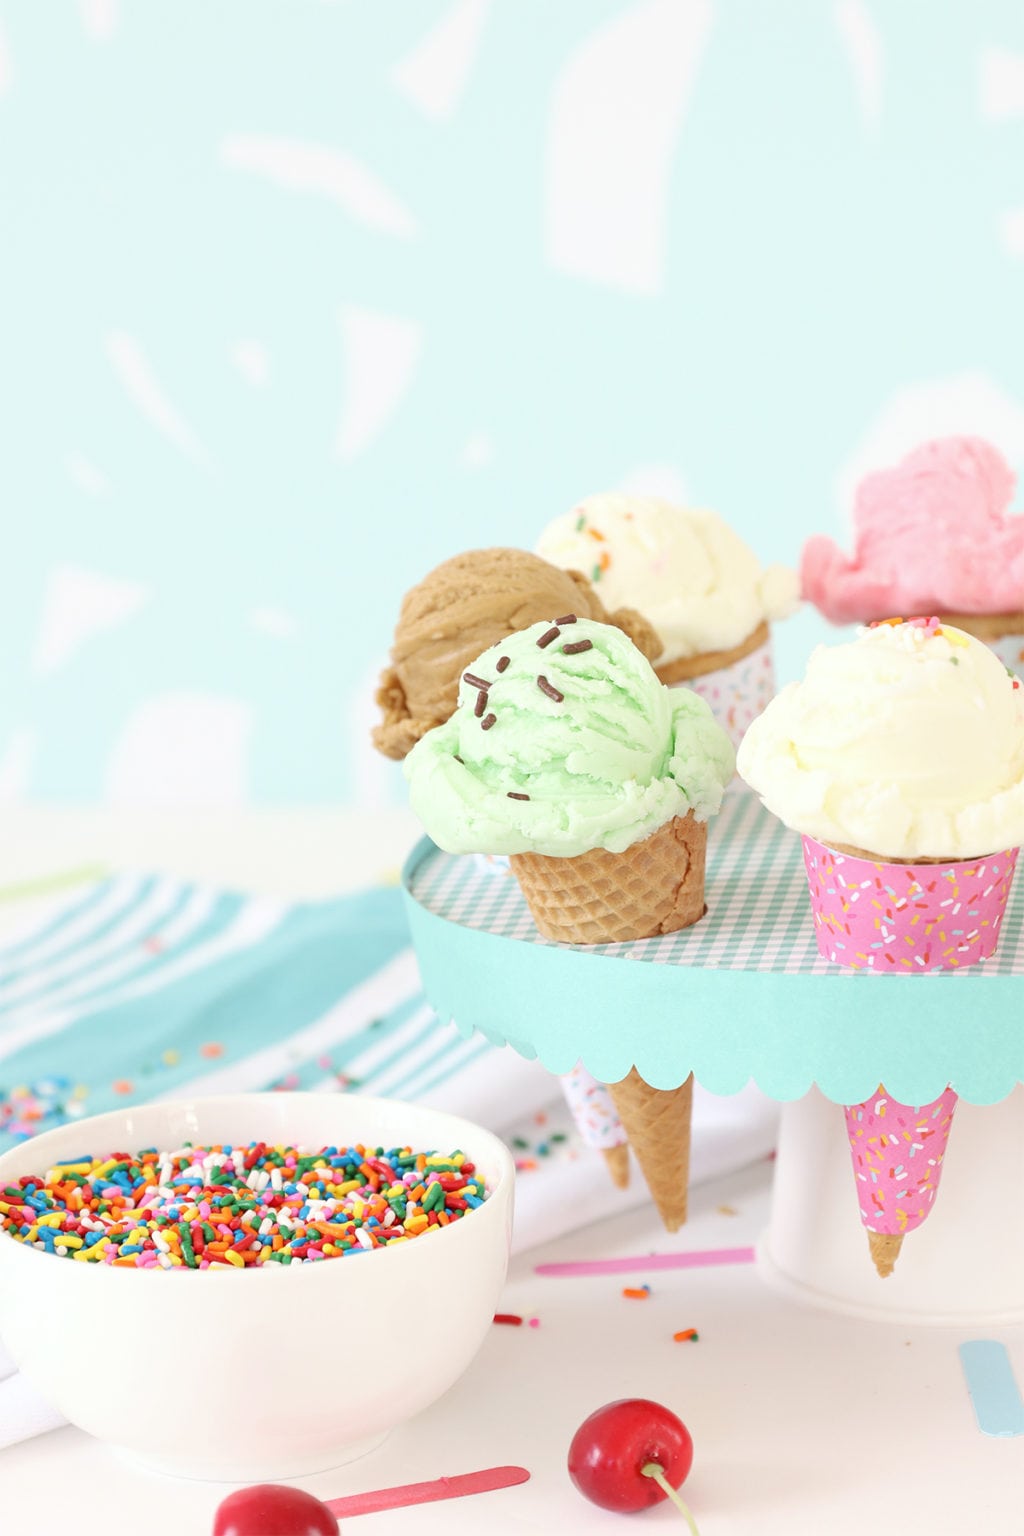 Craft Your Own Ice Cream Social Party | damask love